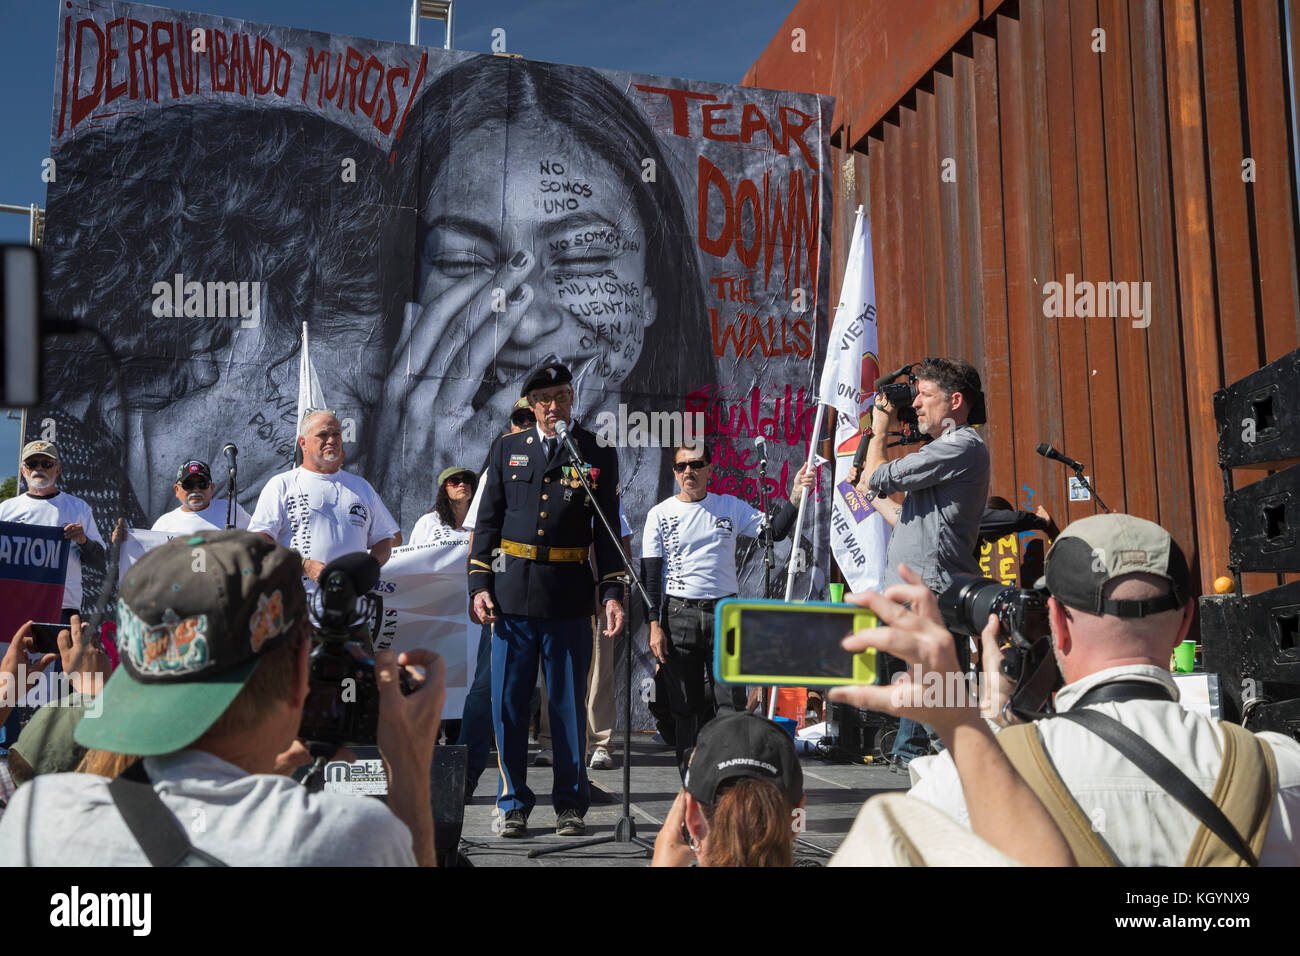 Nogales, Arizona USA and Nogales, Sonora Mexico - 11 November 2017 - On Veterans Day, members of Veterans for Peace led a march and rally on both sides of the U.S.-Mexico border fence to protest the separation of immigrant families, U.S. policies that make it hard for refugees fleeing repression to enter the United States, and the deportation of veterans who have served in the U.S. military. The events were organized by the School of the Americas Watch, a group of religious and community activists. Stock Photo